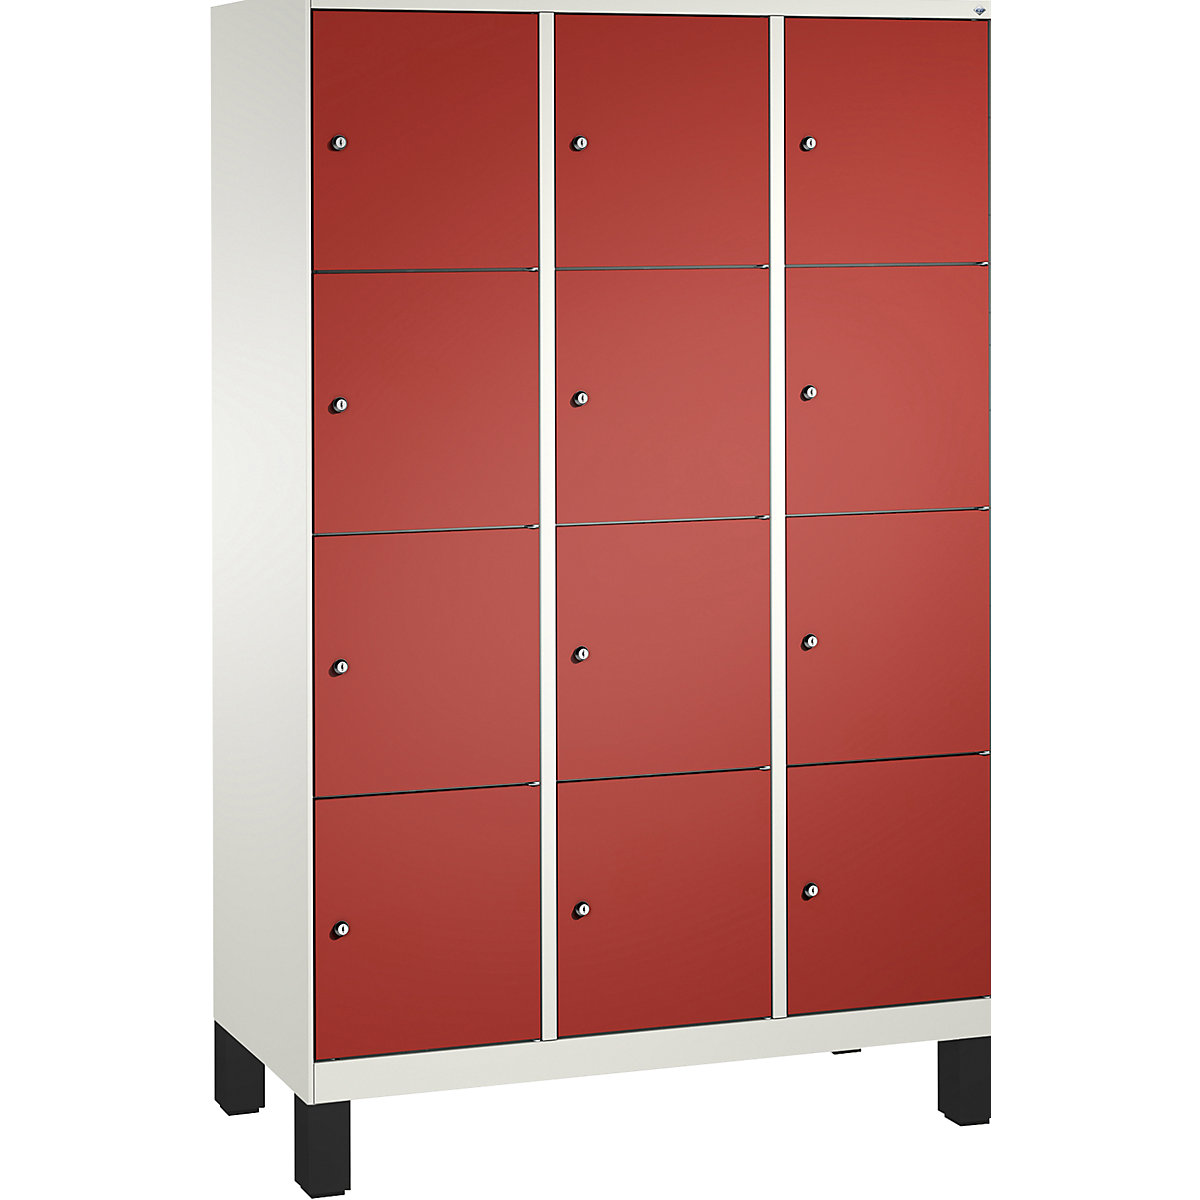 EVOLO locker unit, with feet – C+P, 3 compartments, 4 shelf compartments each, compartment width 400 mm, traffic white / flame red-7